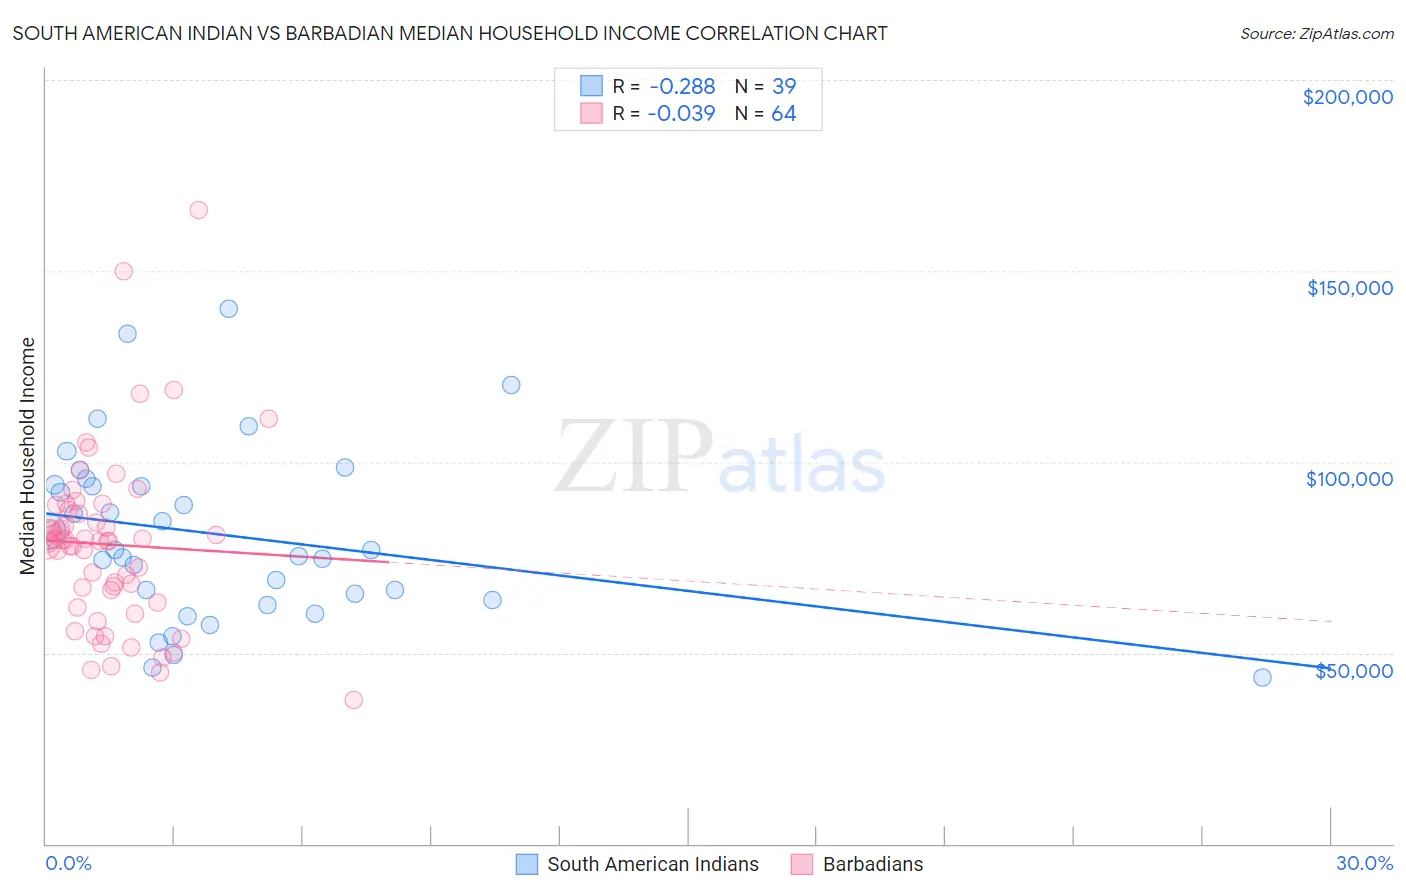 South American Indian vs Barbadian Median Household Income